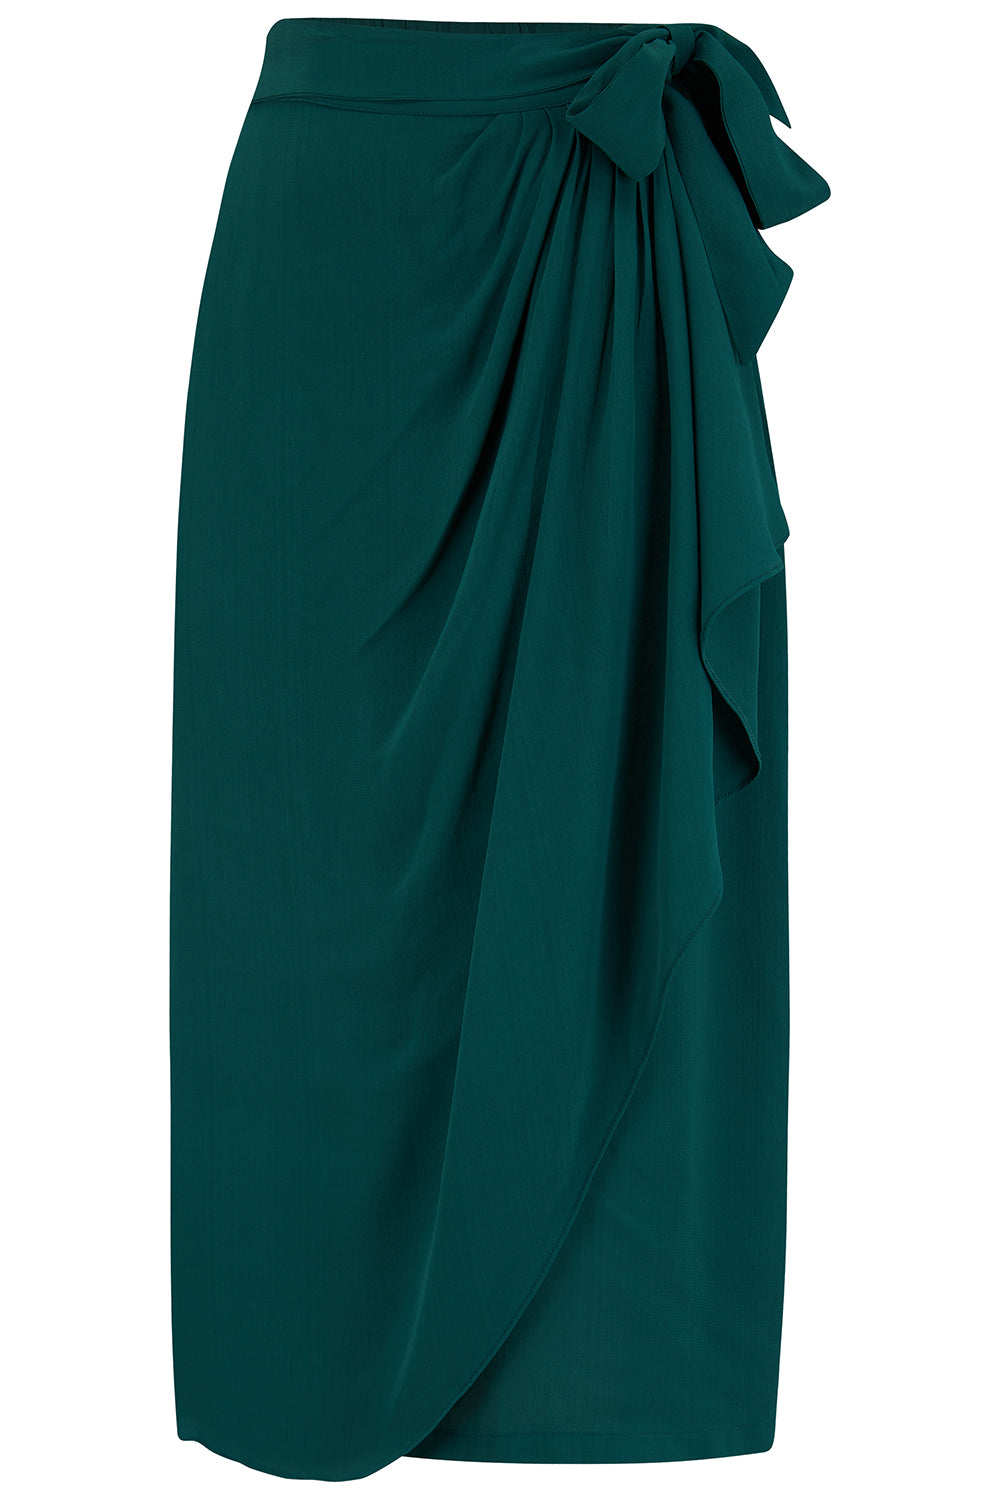 Deanna Sarong Skirt In Green, Classic & Authentic 1940s True Vintage Inspired Style - CC41, Goodwood Revival, Twinwood Festival, Viva Las Vegas Rockabilly Weekend Rock n Romance The Seamstress Of Bloomsbury